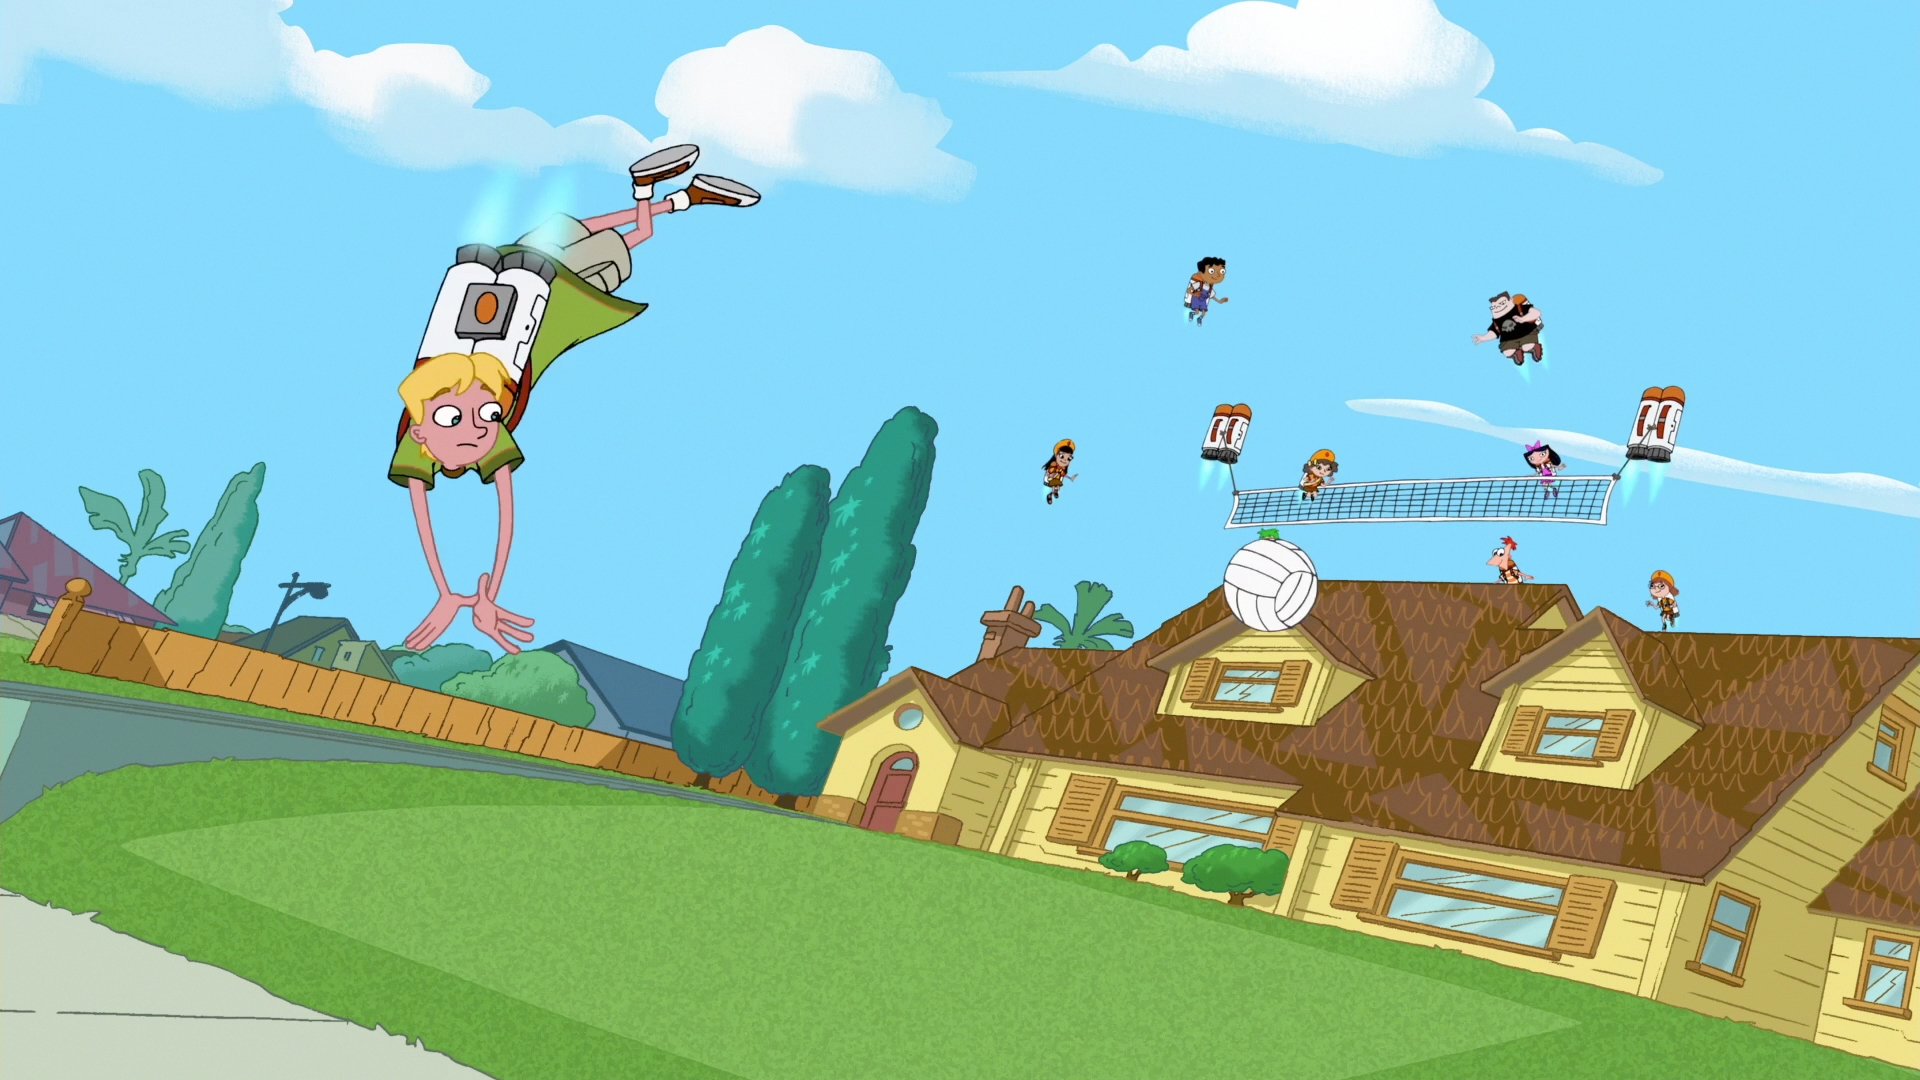 Jetpack Volleyball | Phineas and Ferb Wiki | Fandom powered by Wikia1920 x 1080